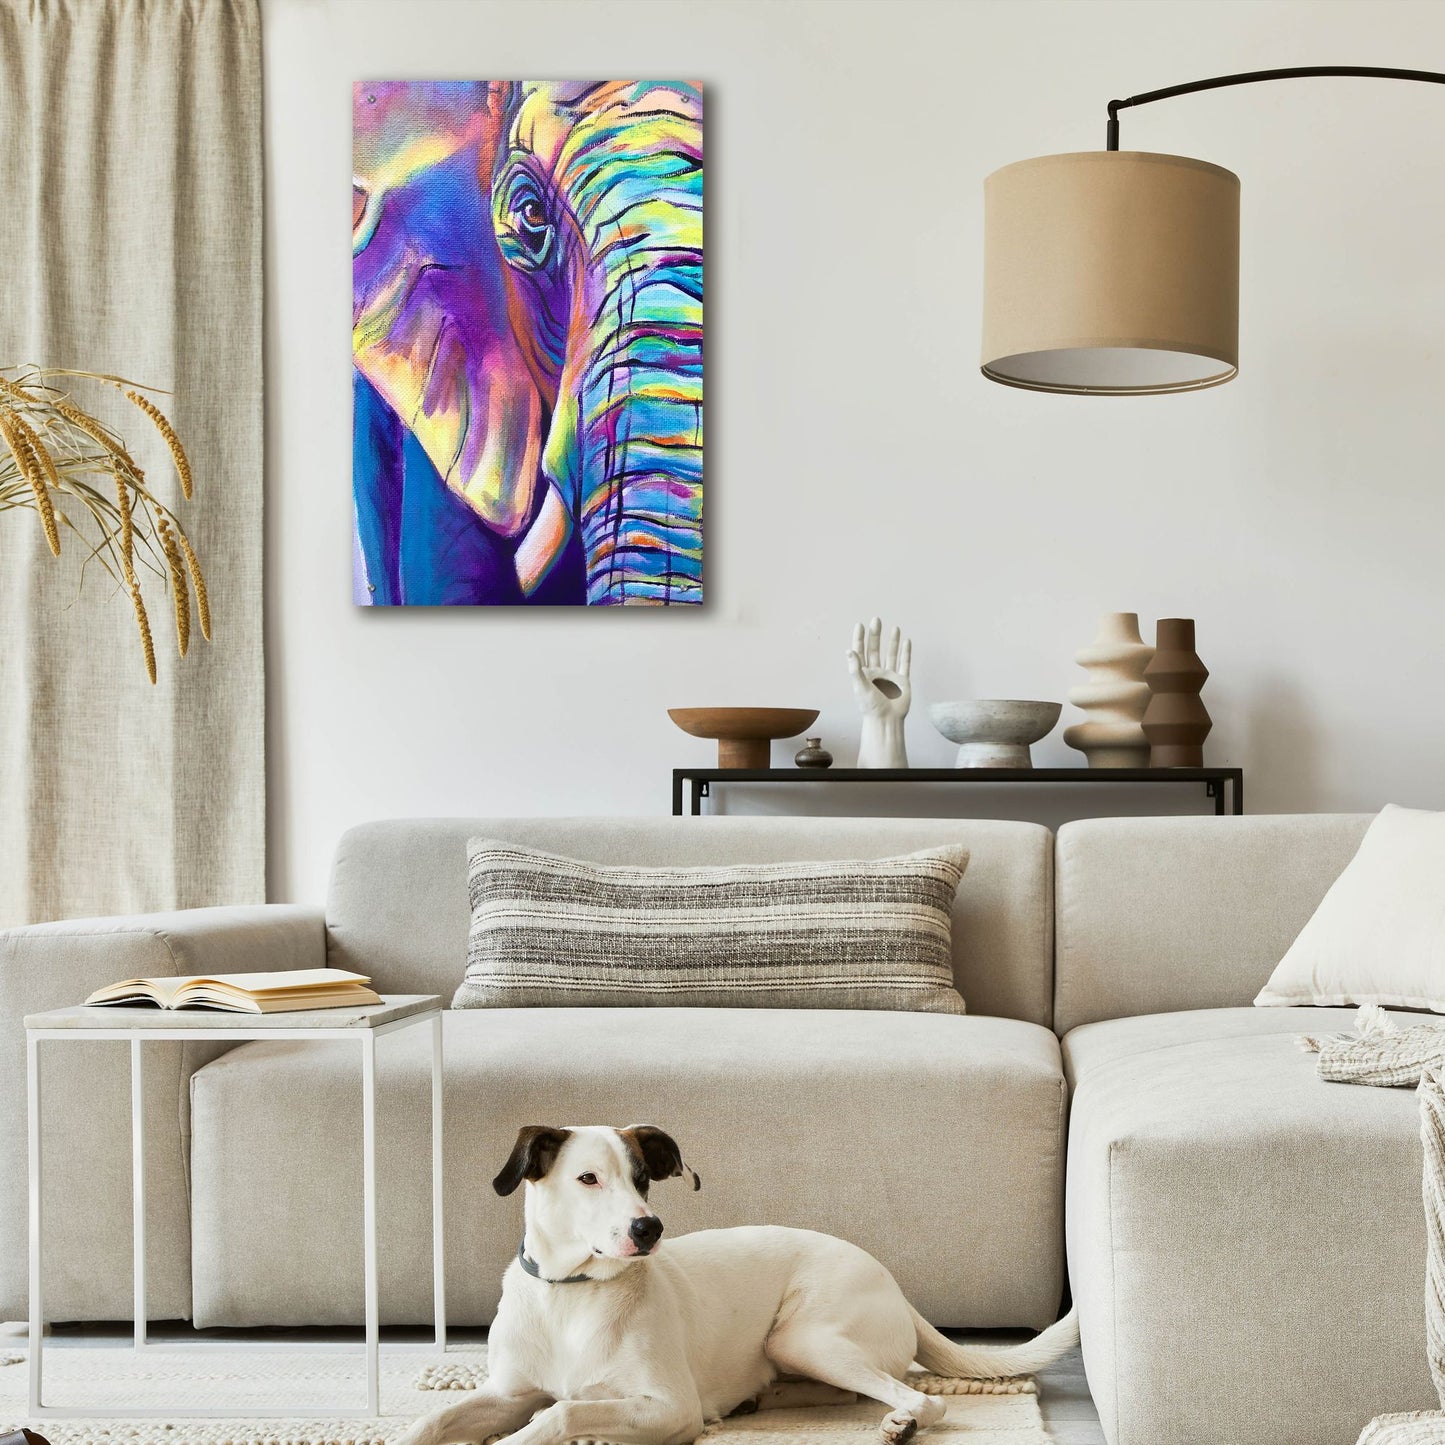 Epic Art 'Elephant - Butterfly Left2 by Dawg Painter, Acrylic Glass Wall Art,24x36